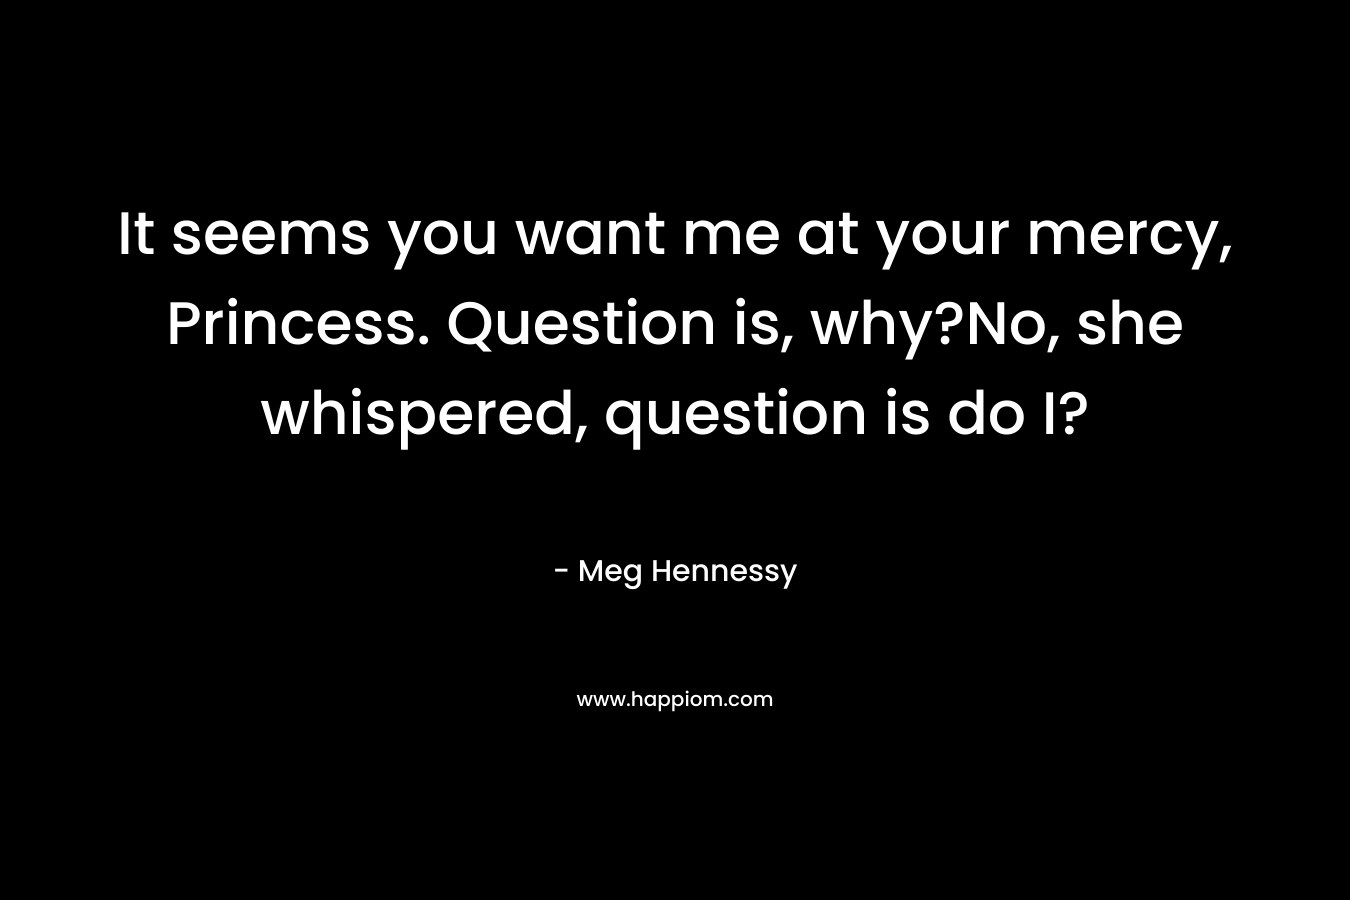 It seems you want me at your mercy, Princess. Question is, why?No, she whispered, question is do I? – Meg Hennessy